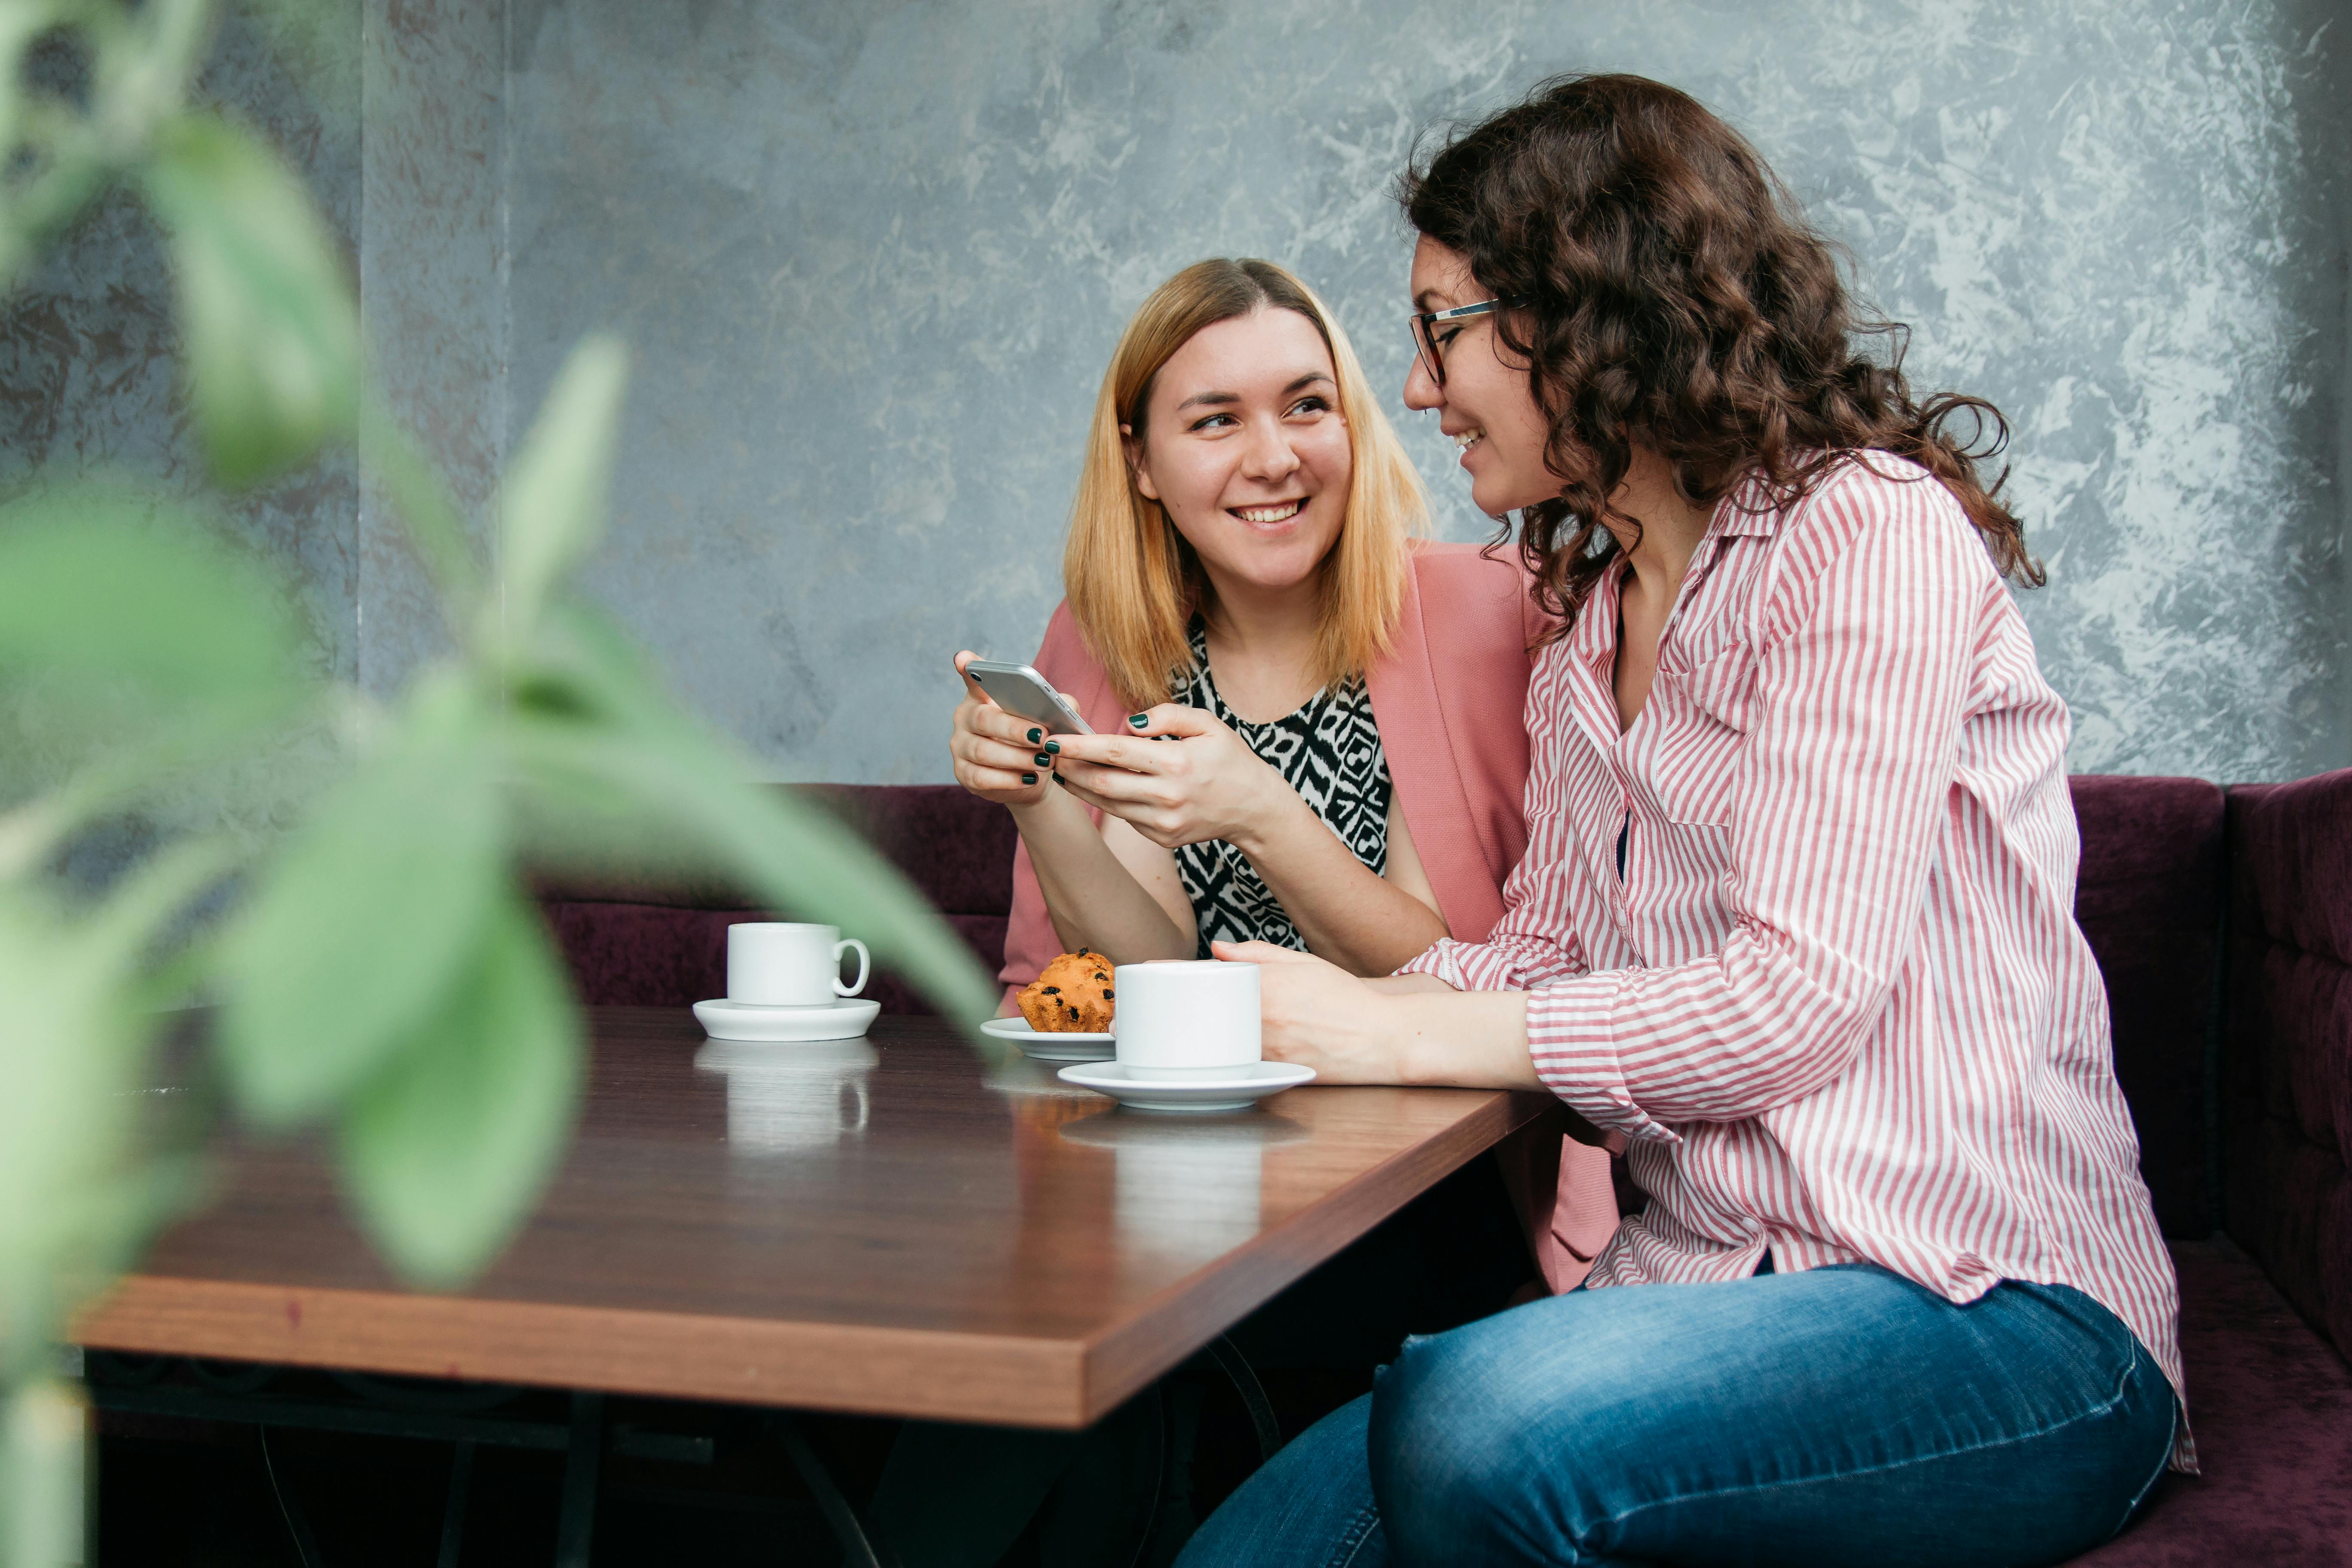 Two women share ideas in a cafe | Source: Pexels